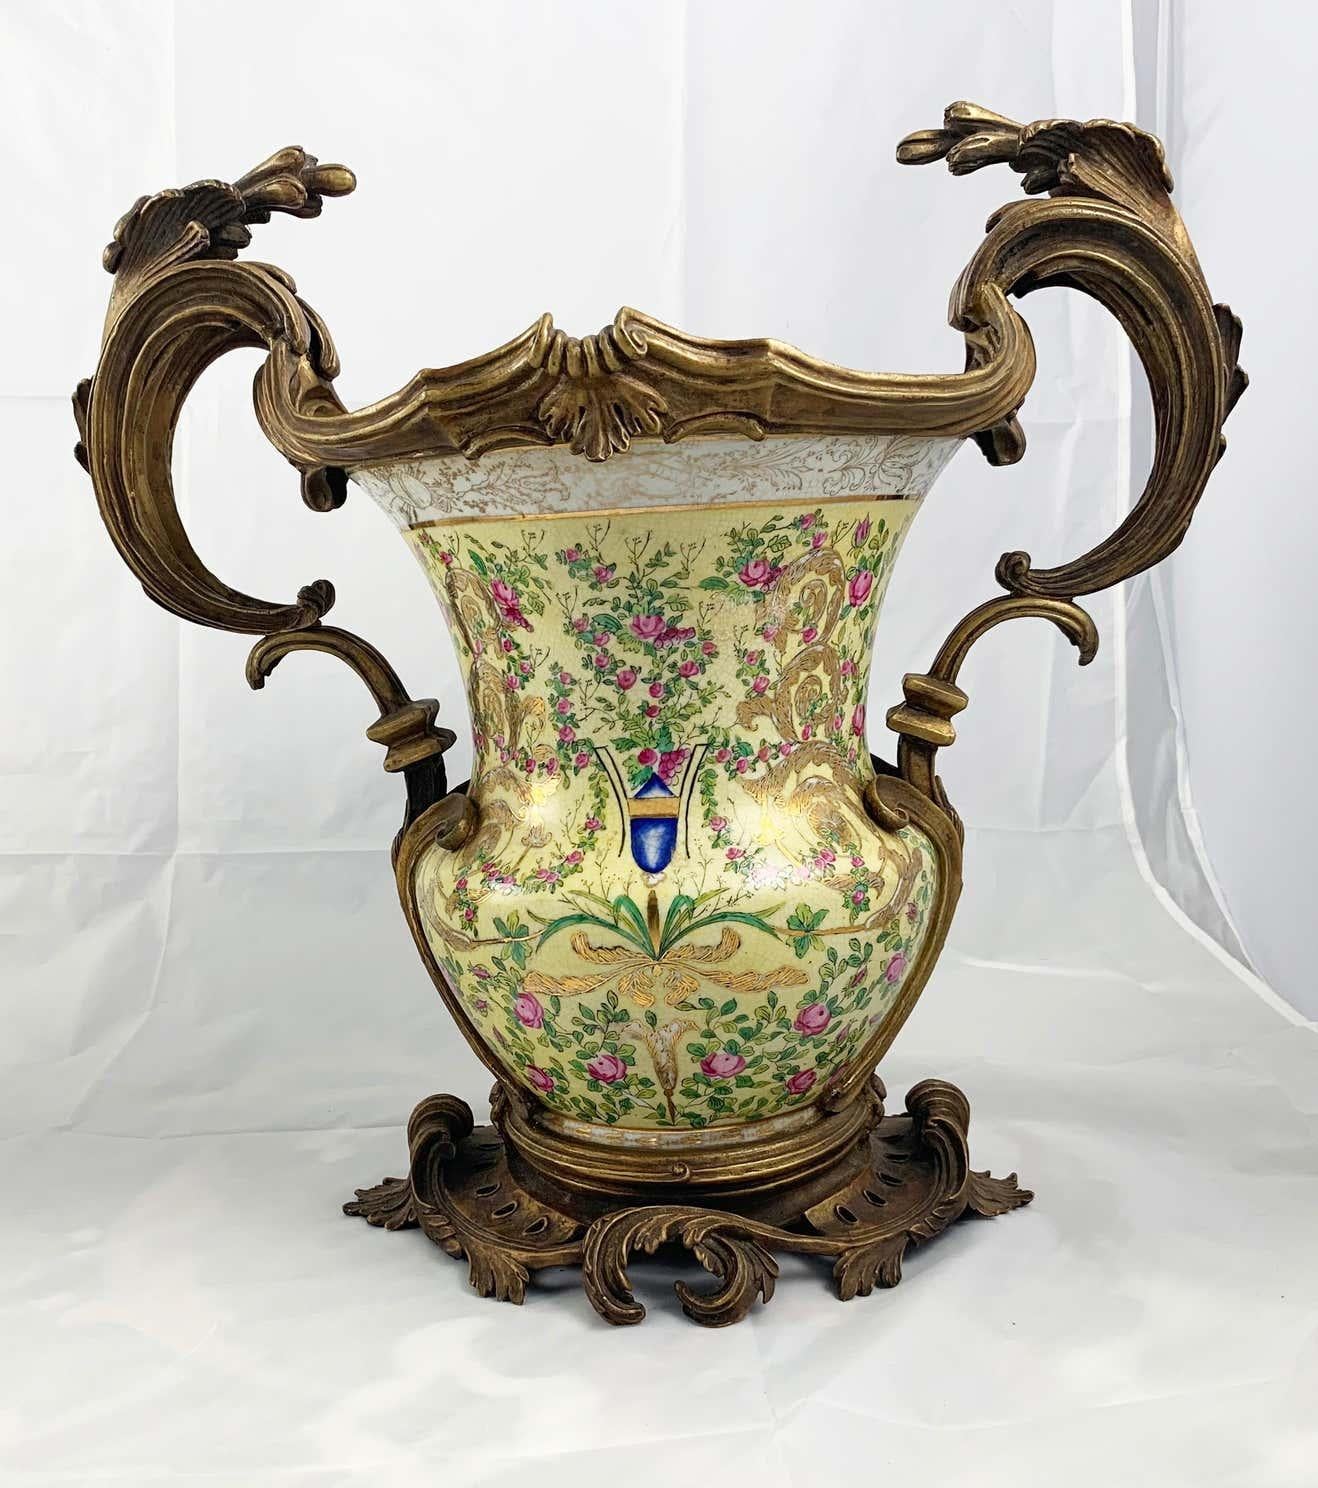 20th Century Pair of French Porcelain and Ormolu-Mounted Twin Handled Urns For Sale 1